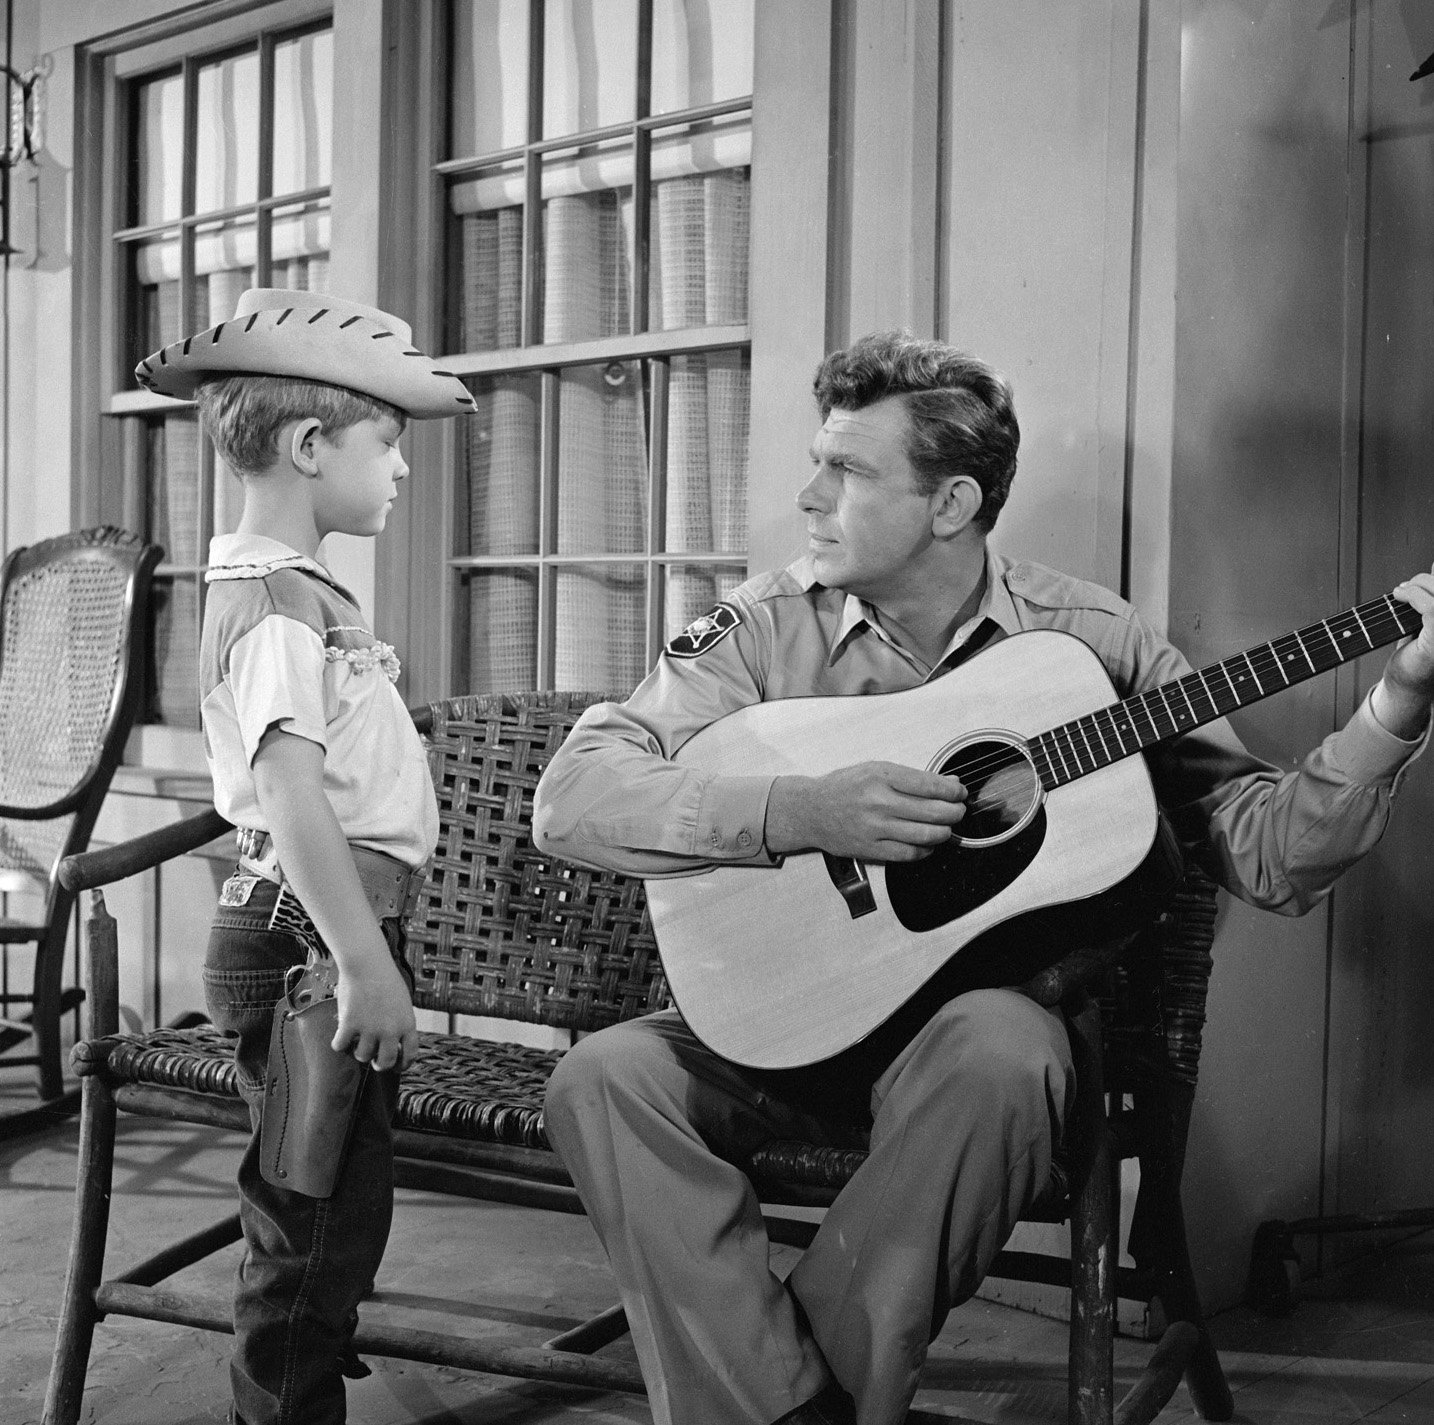 Actor Andy Griffith, right, plays guitar alongside Ron Howard in a scene from 'The Andy Griffith Show.'